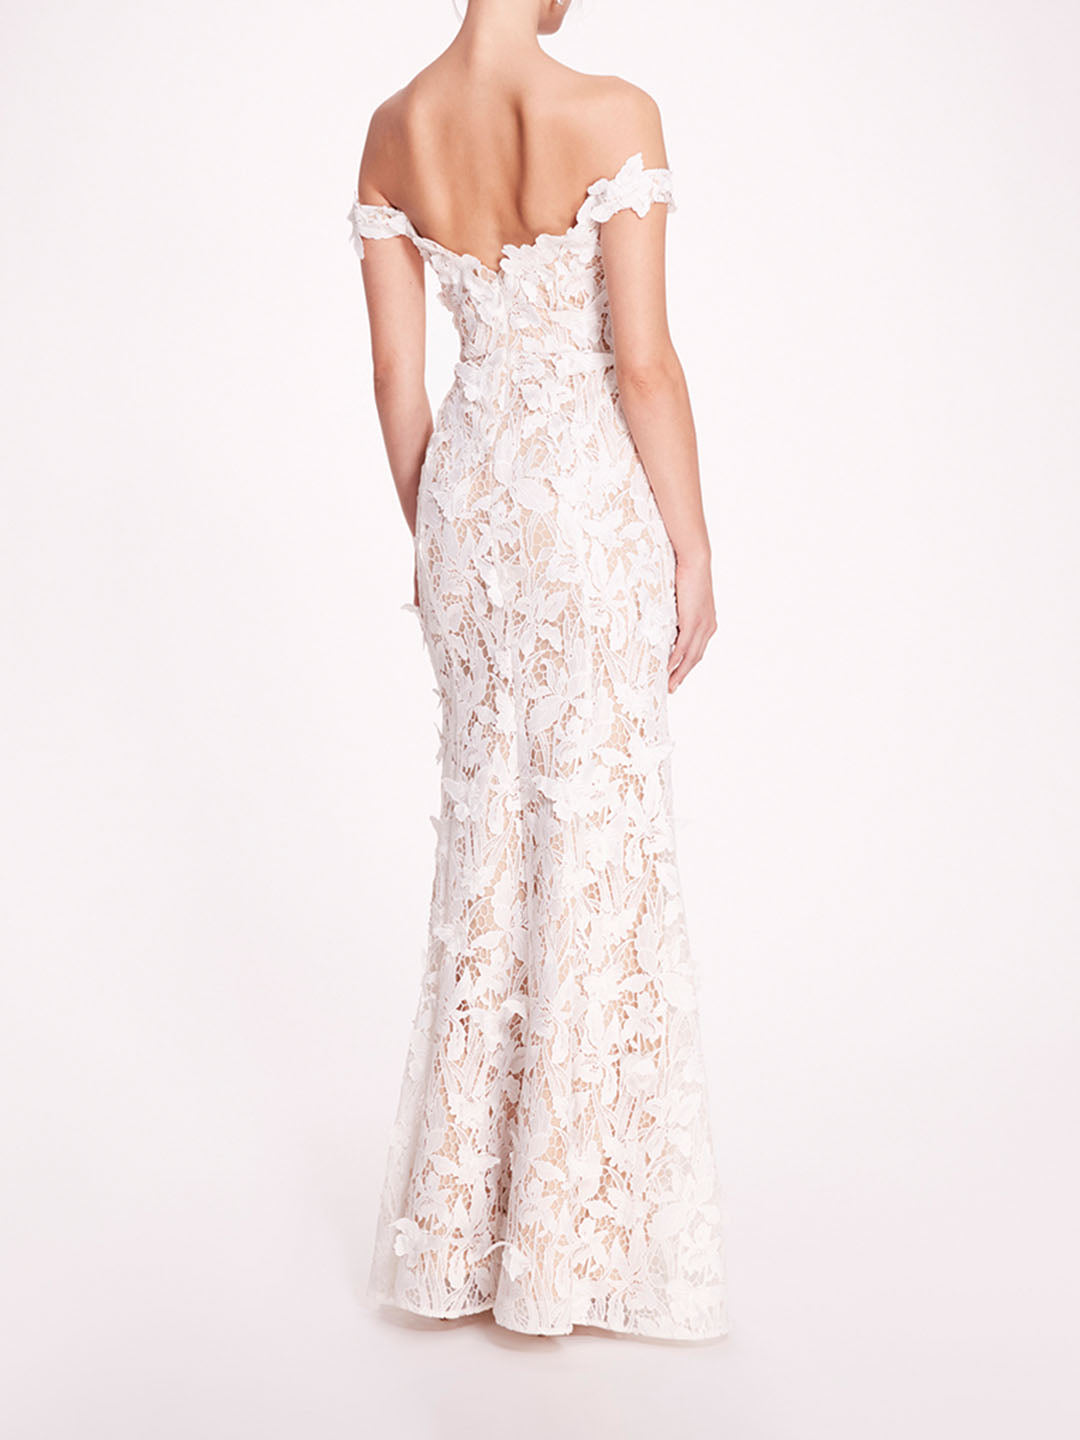 Organic Lace Gown | Marchesa